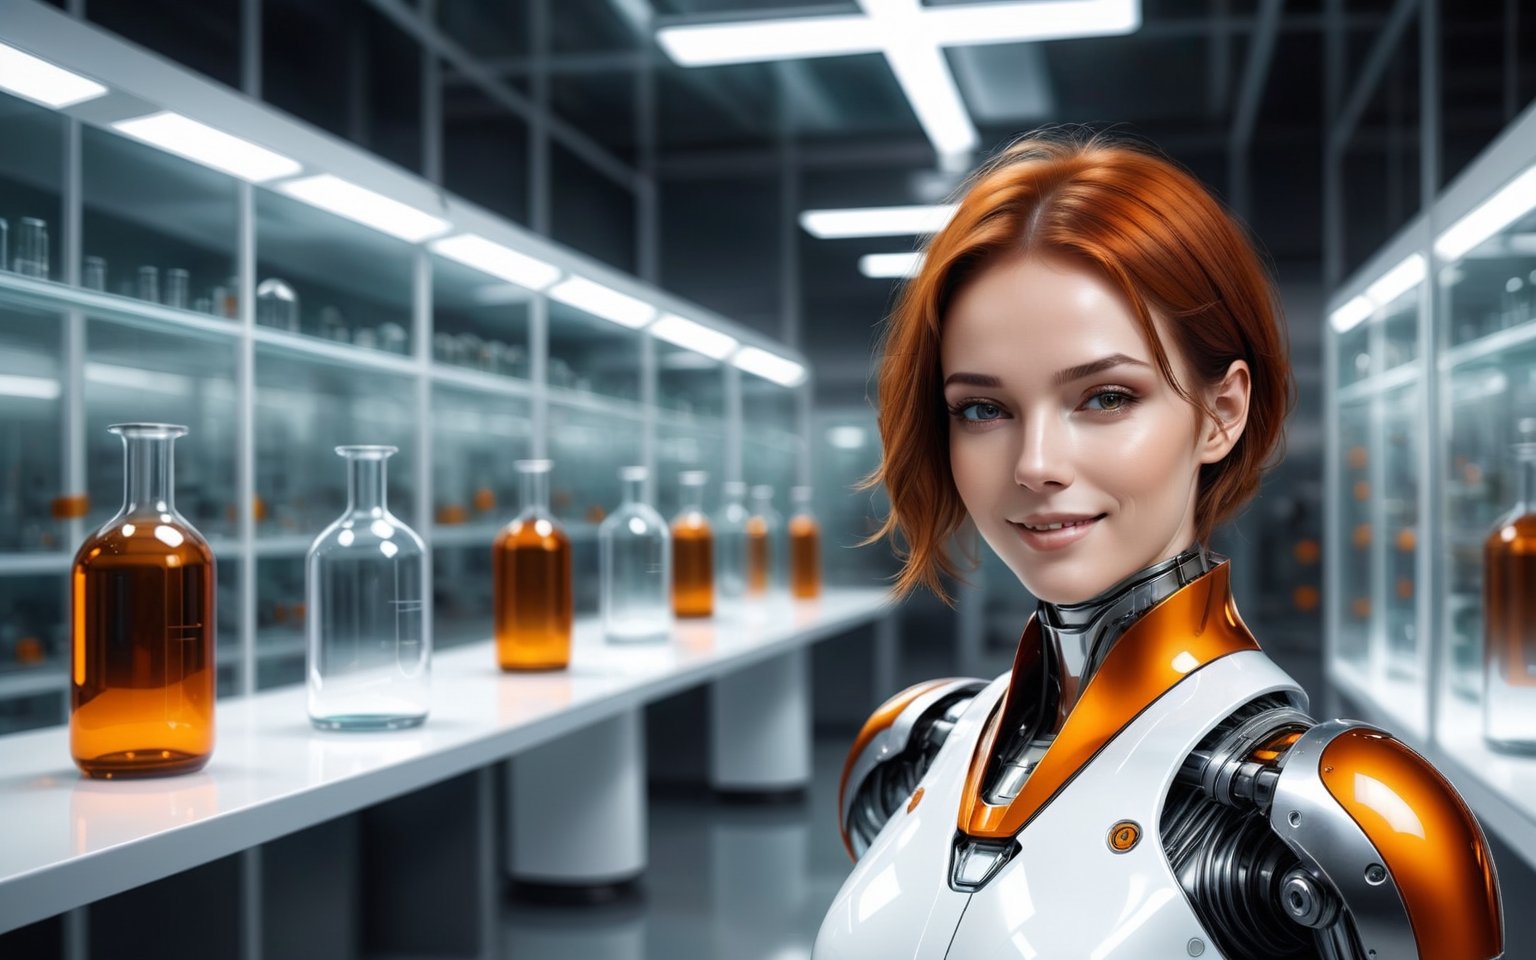 Generating ultra-realistic images of female robots. spcrft, smiling, brown hair, (transparent part), chrometech,((orange and white metal set)), ((glass elements)),Standing in the biological laboratory of the spaceship,the lab is a circle room,There are many alien contained in glass bottles,white futuristic minimalist interior design,